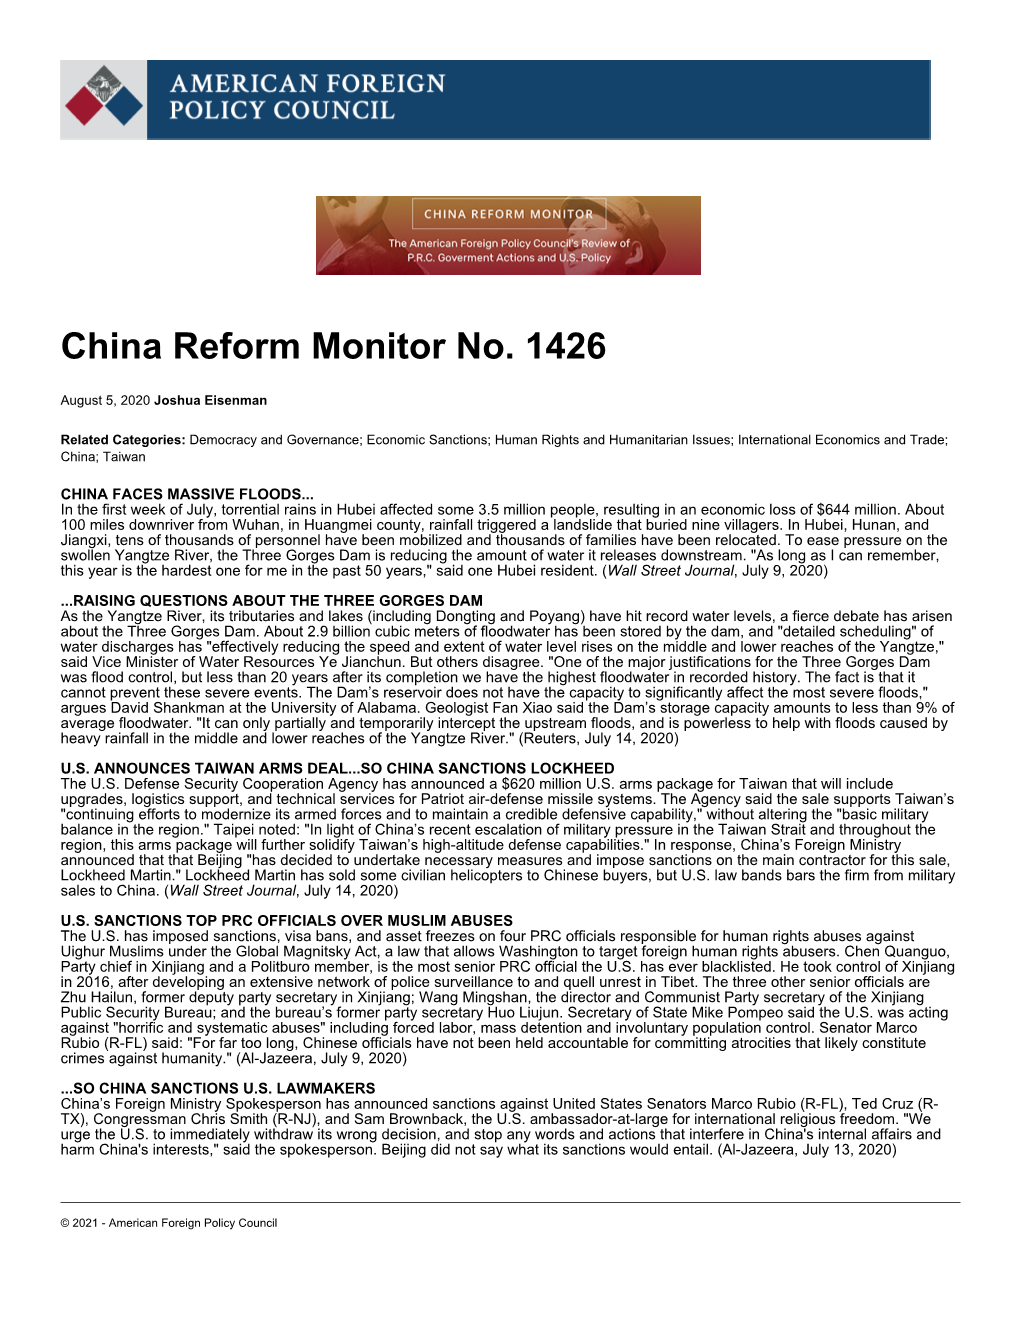 China Reform Monitor No. 1426 | American Foreign Policy Council